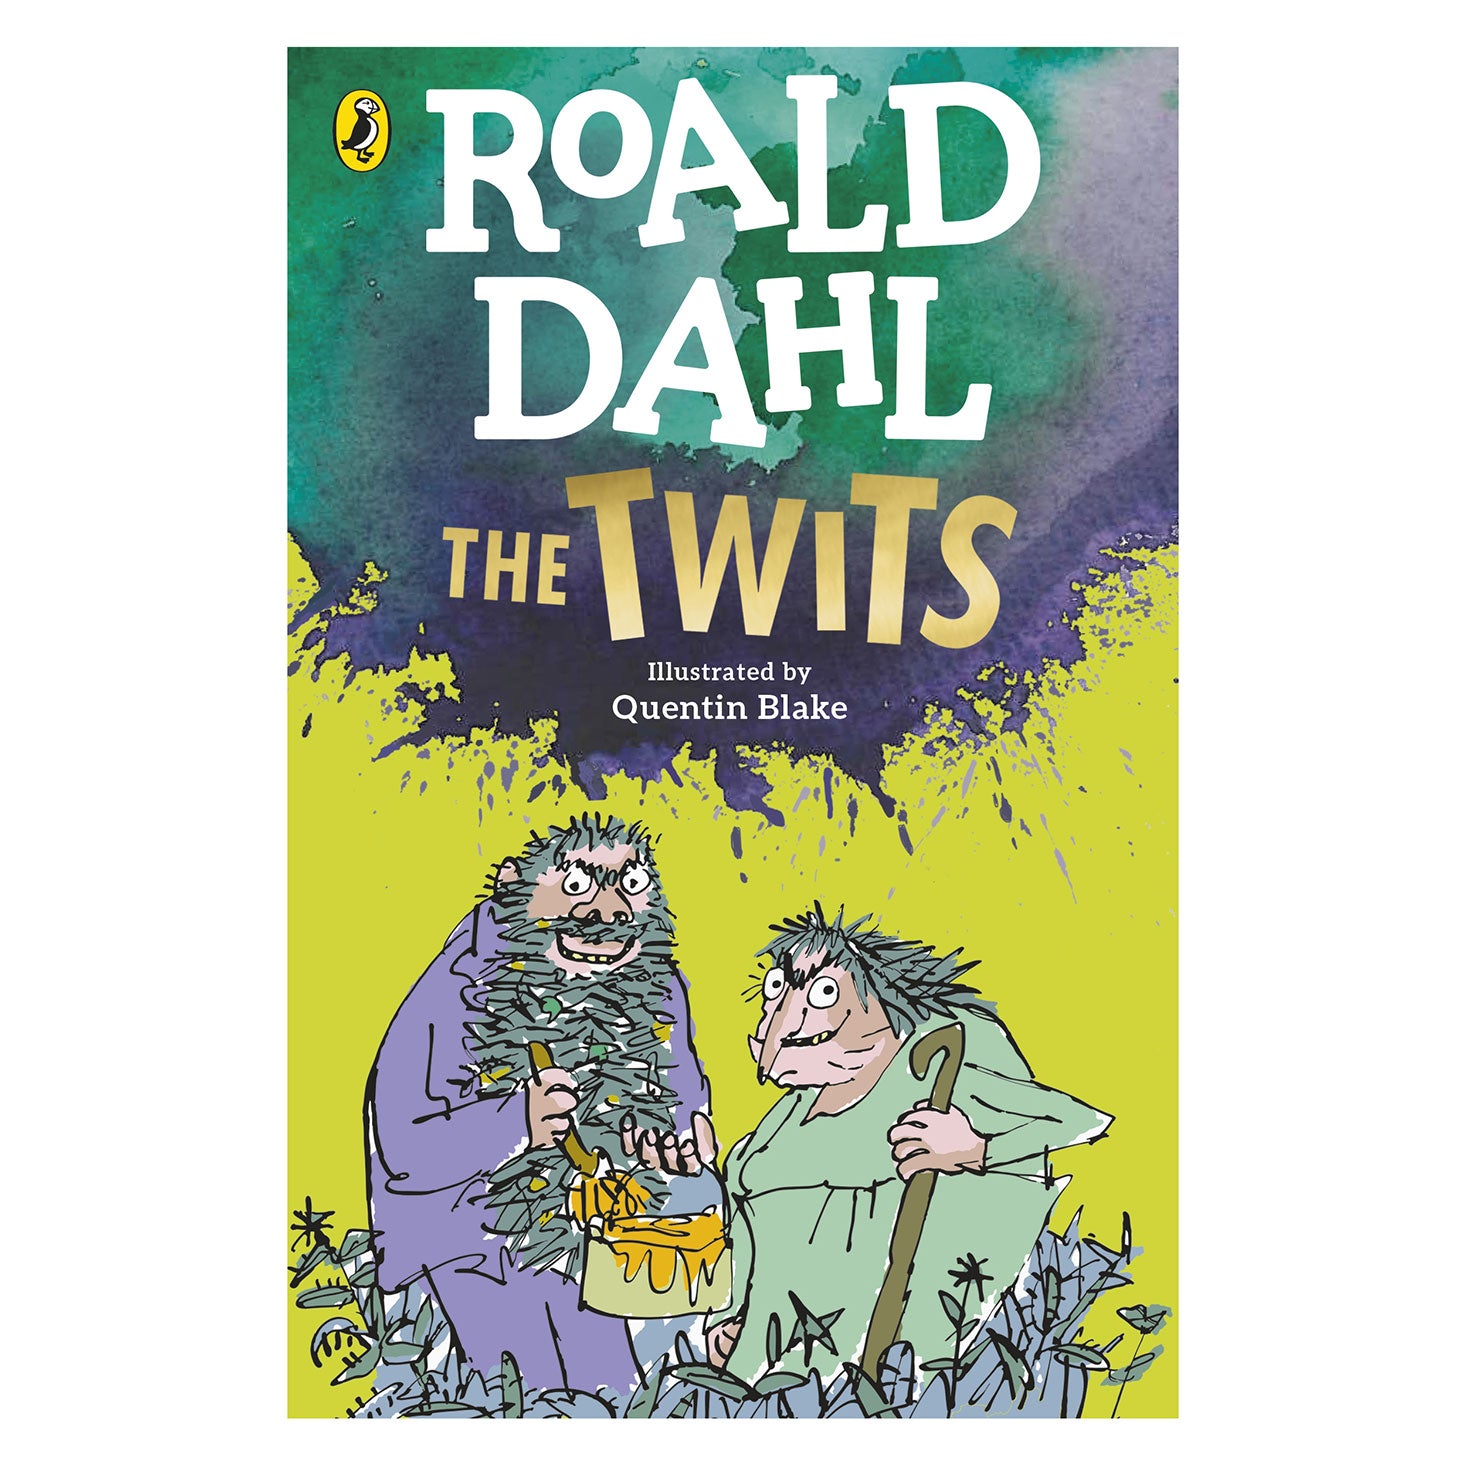 The Twits by Roald Dahl with illustrations by Quentin Blake